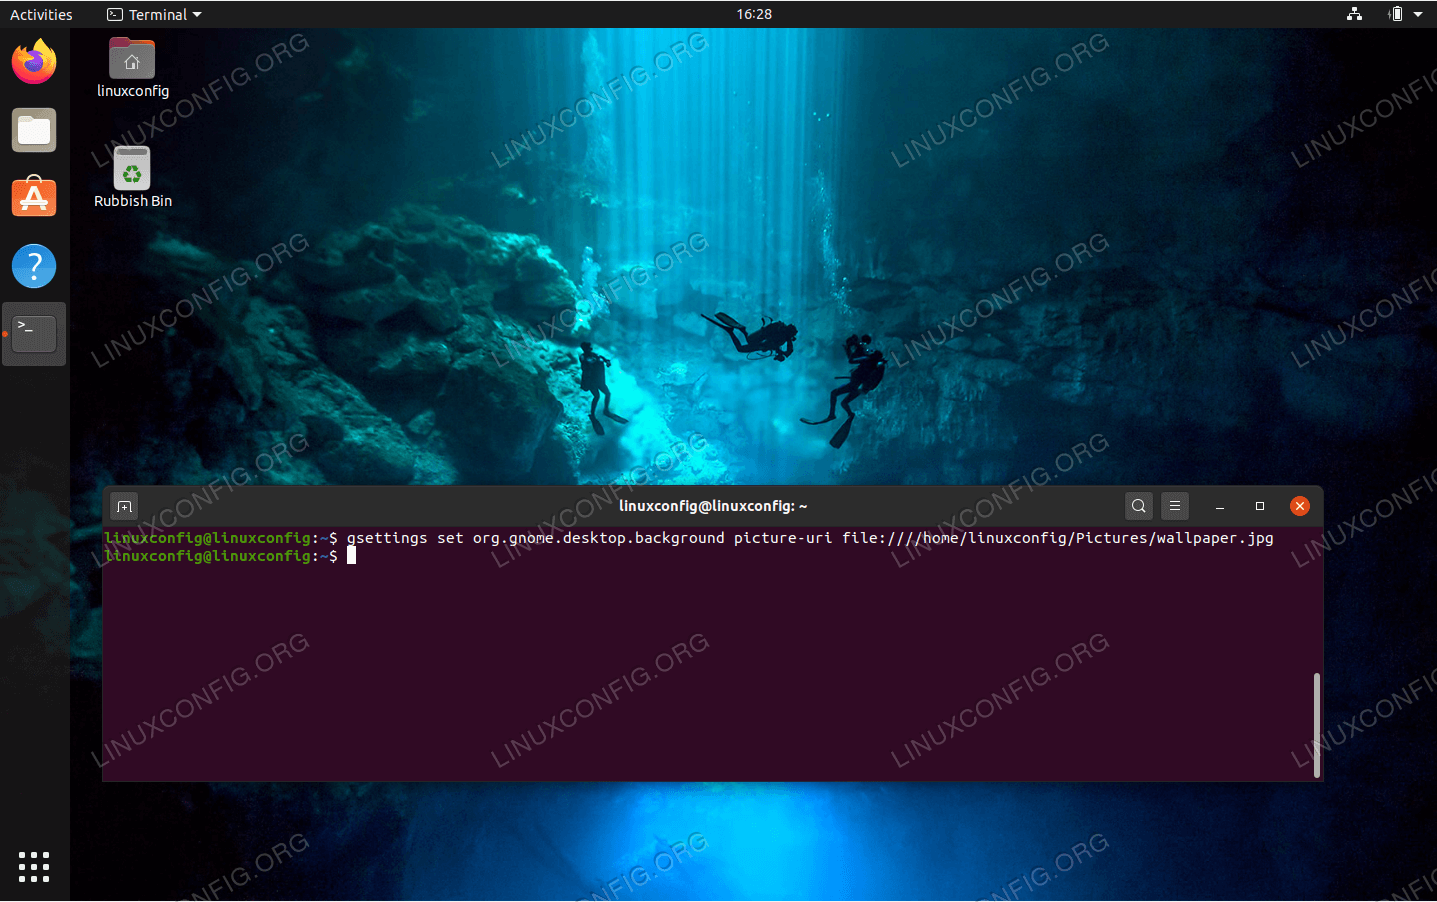 HD wallpaper: linux, cli commands, Technology, data, number, communication  | Wallpaper Flare